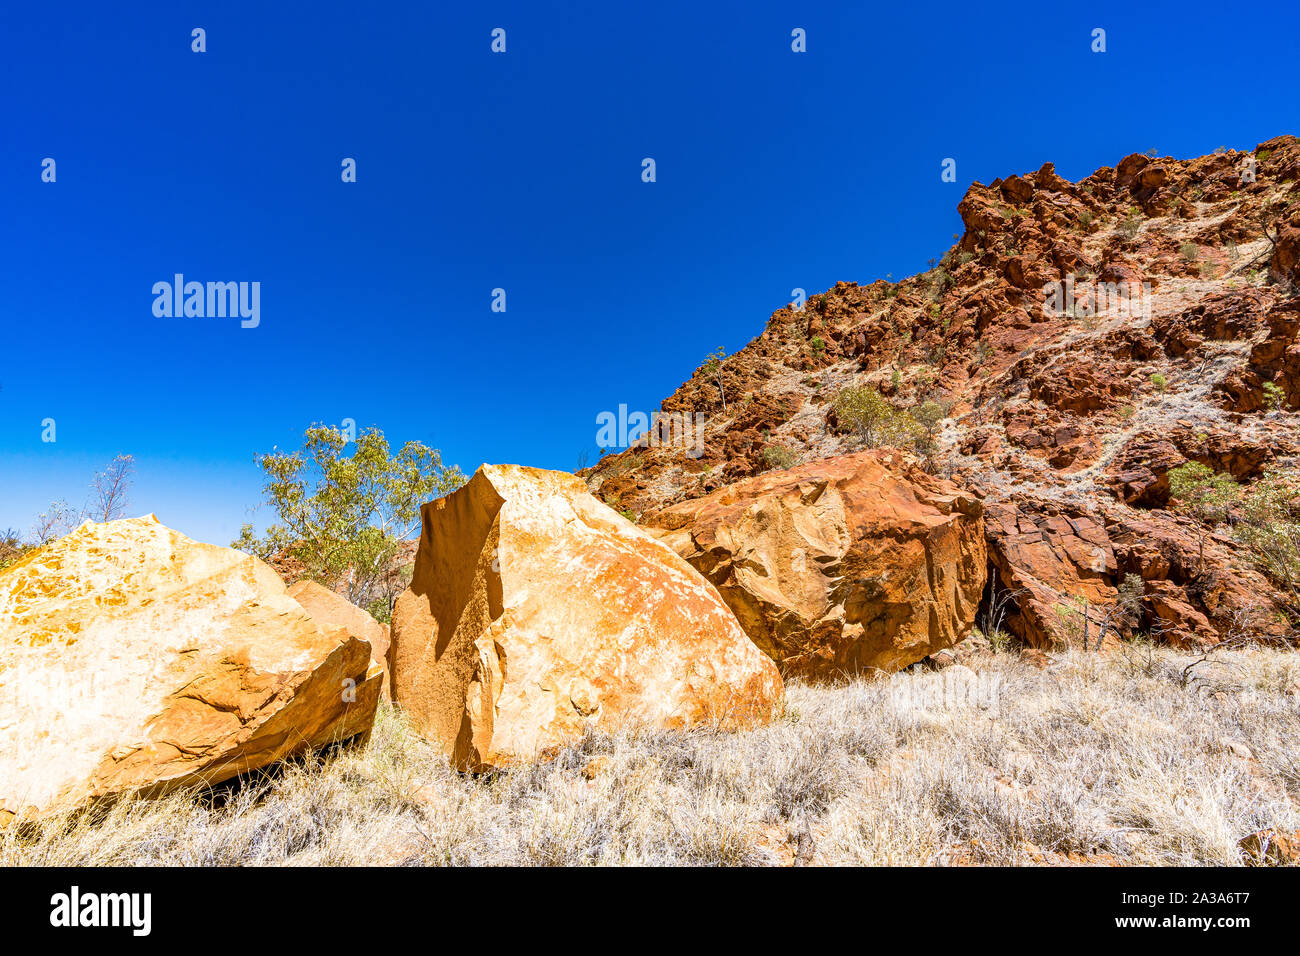 N'Dhala Gorge in the East MacDonnell Ranges in the Northern Territory, Australia. Stock Photo